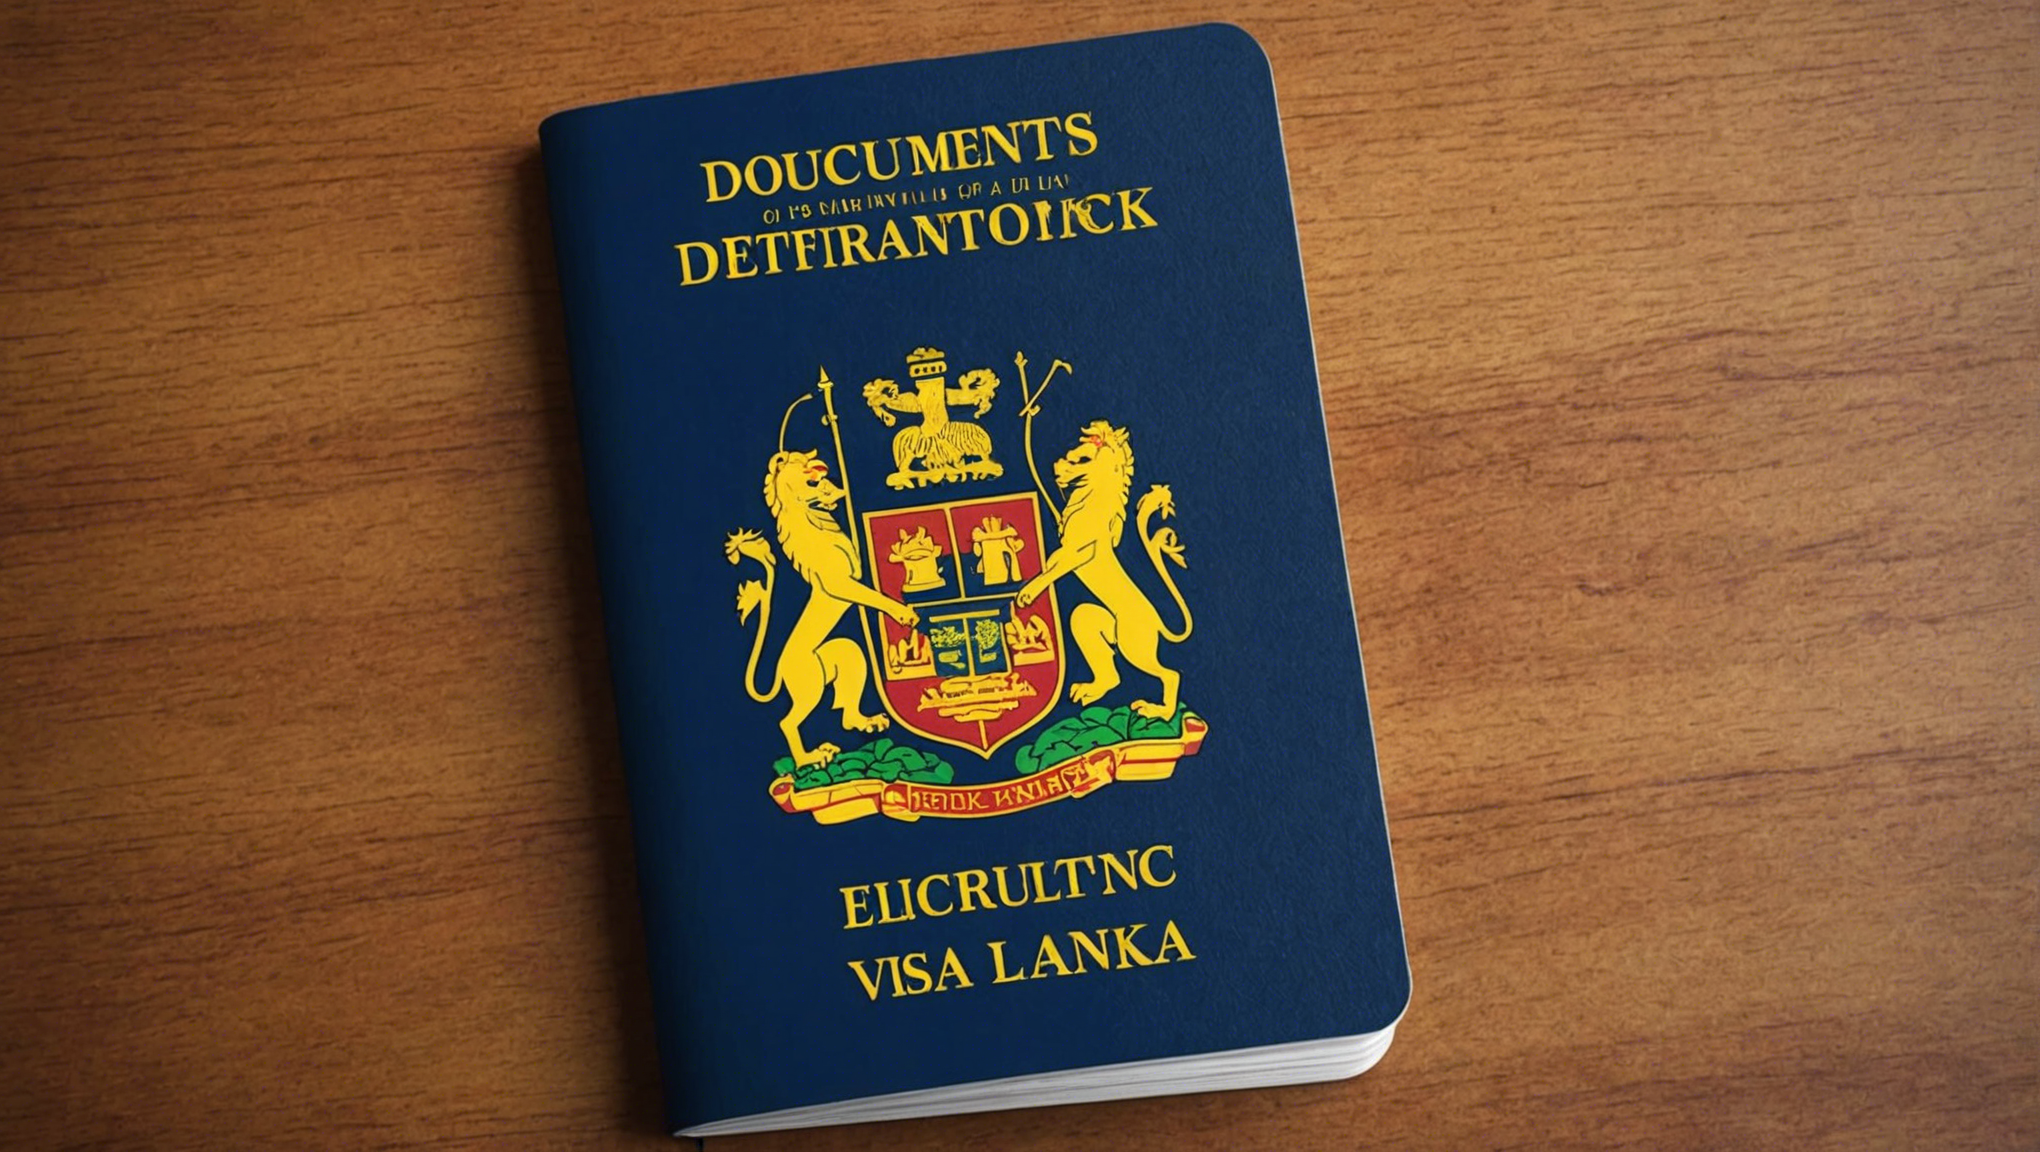 find out what documents you need to apply for an e-visa for sri lanka and make the administrative process easier.